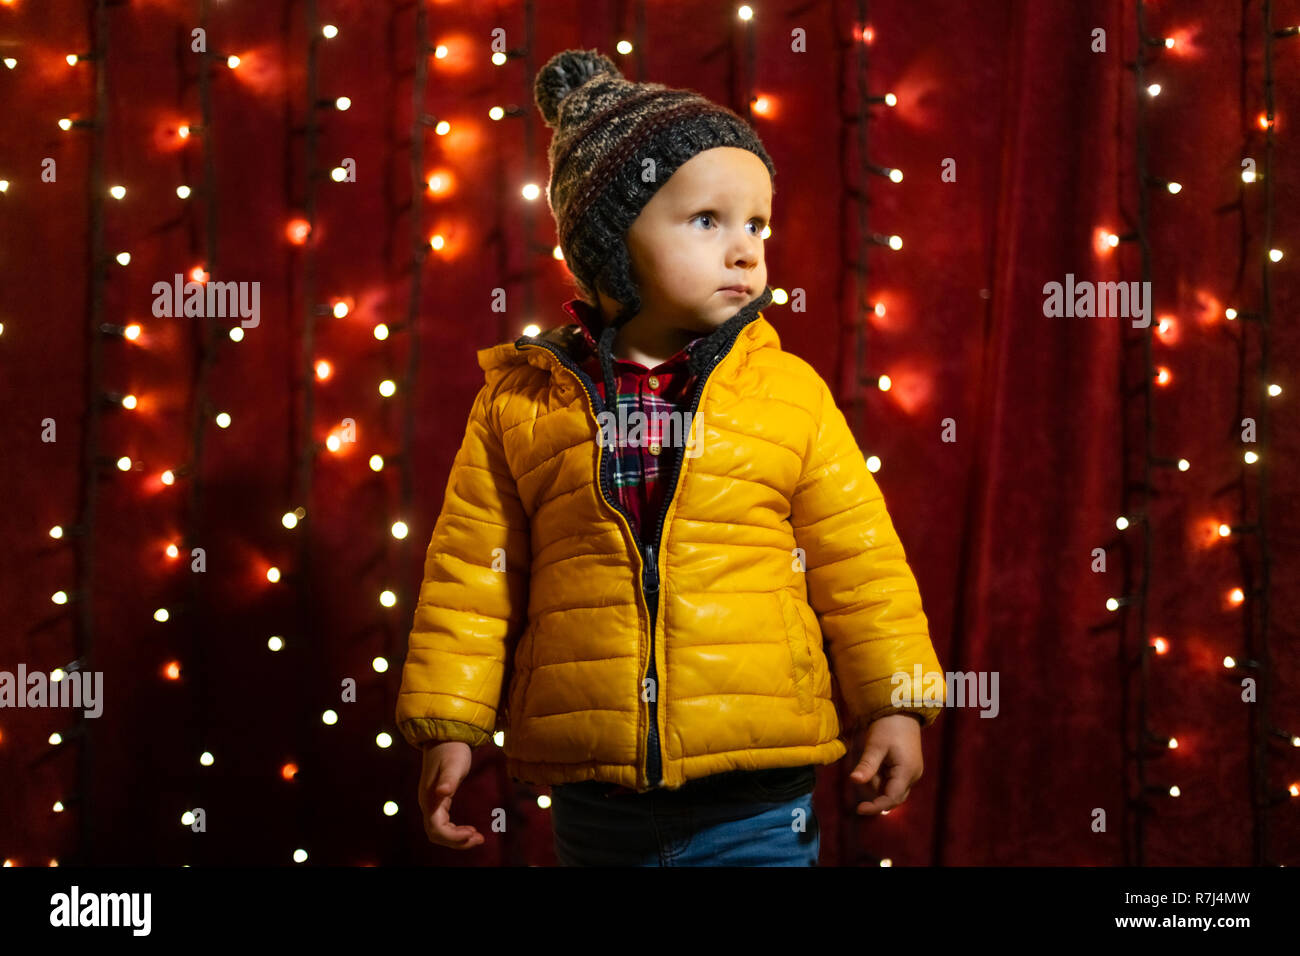 Young boy posing serious in front of lights wall at Christmas market. Stock Photo